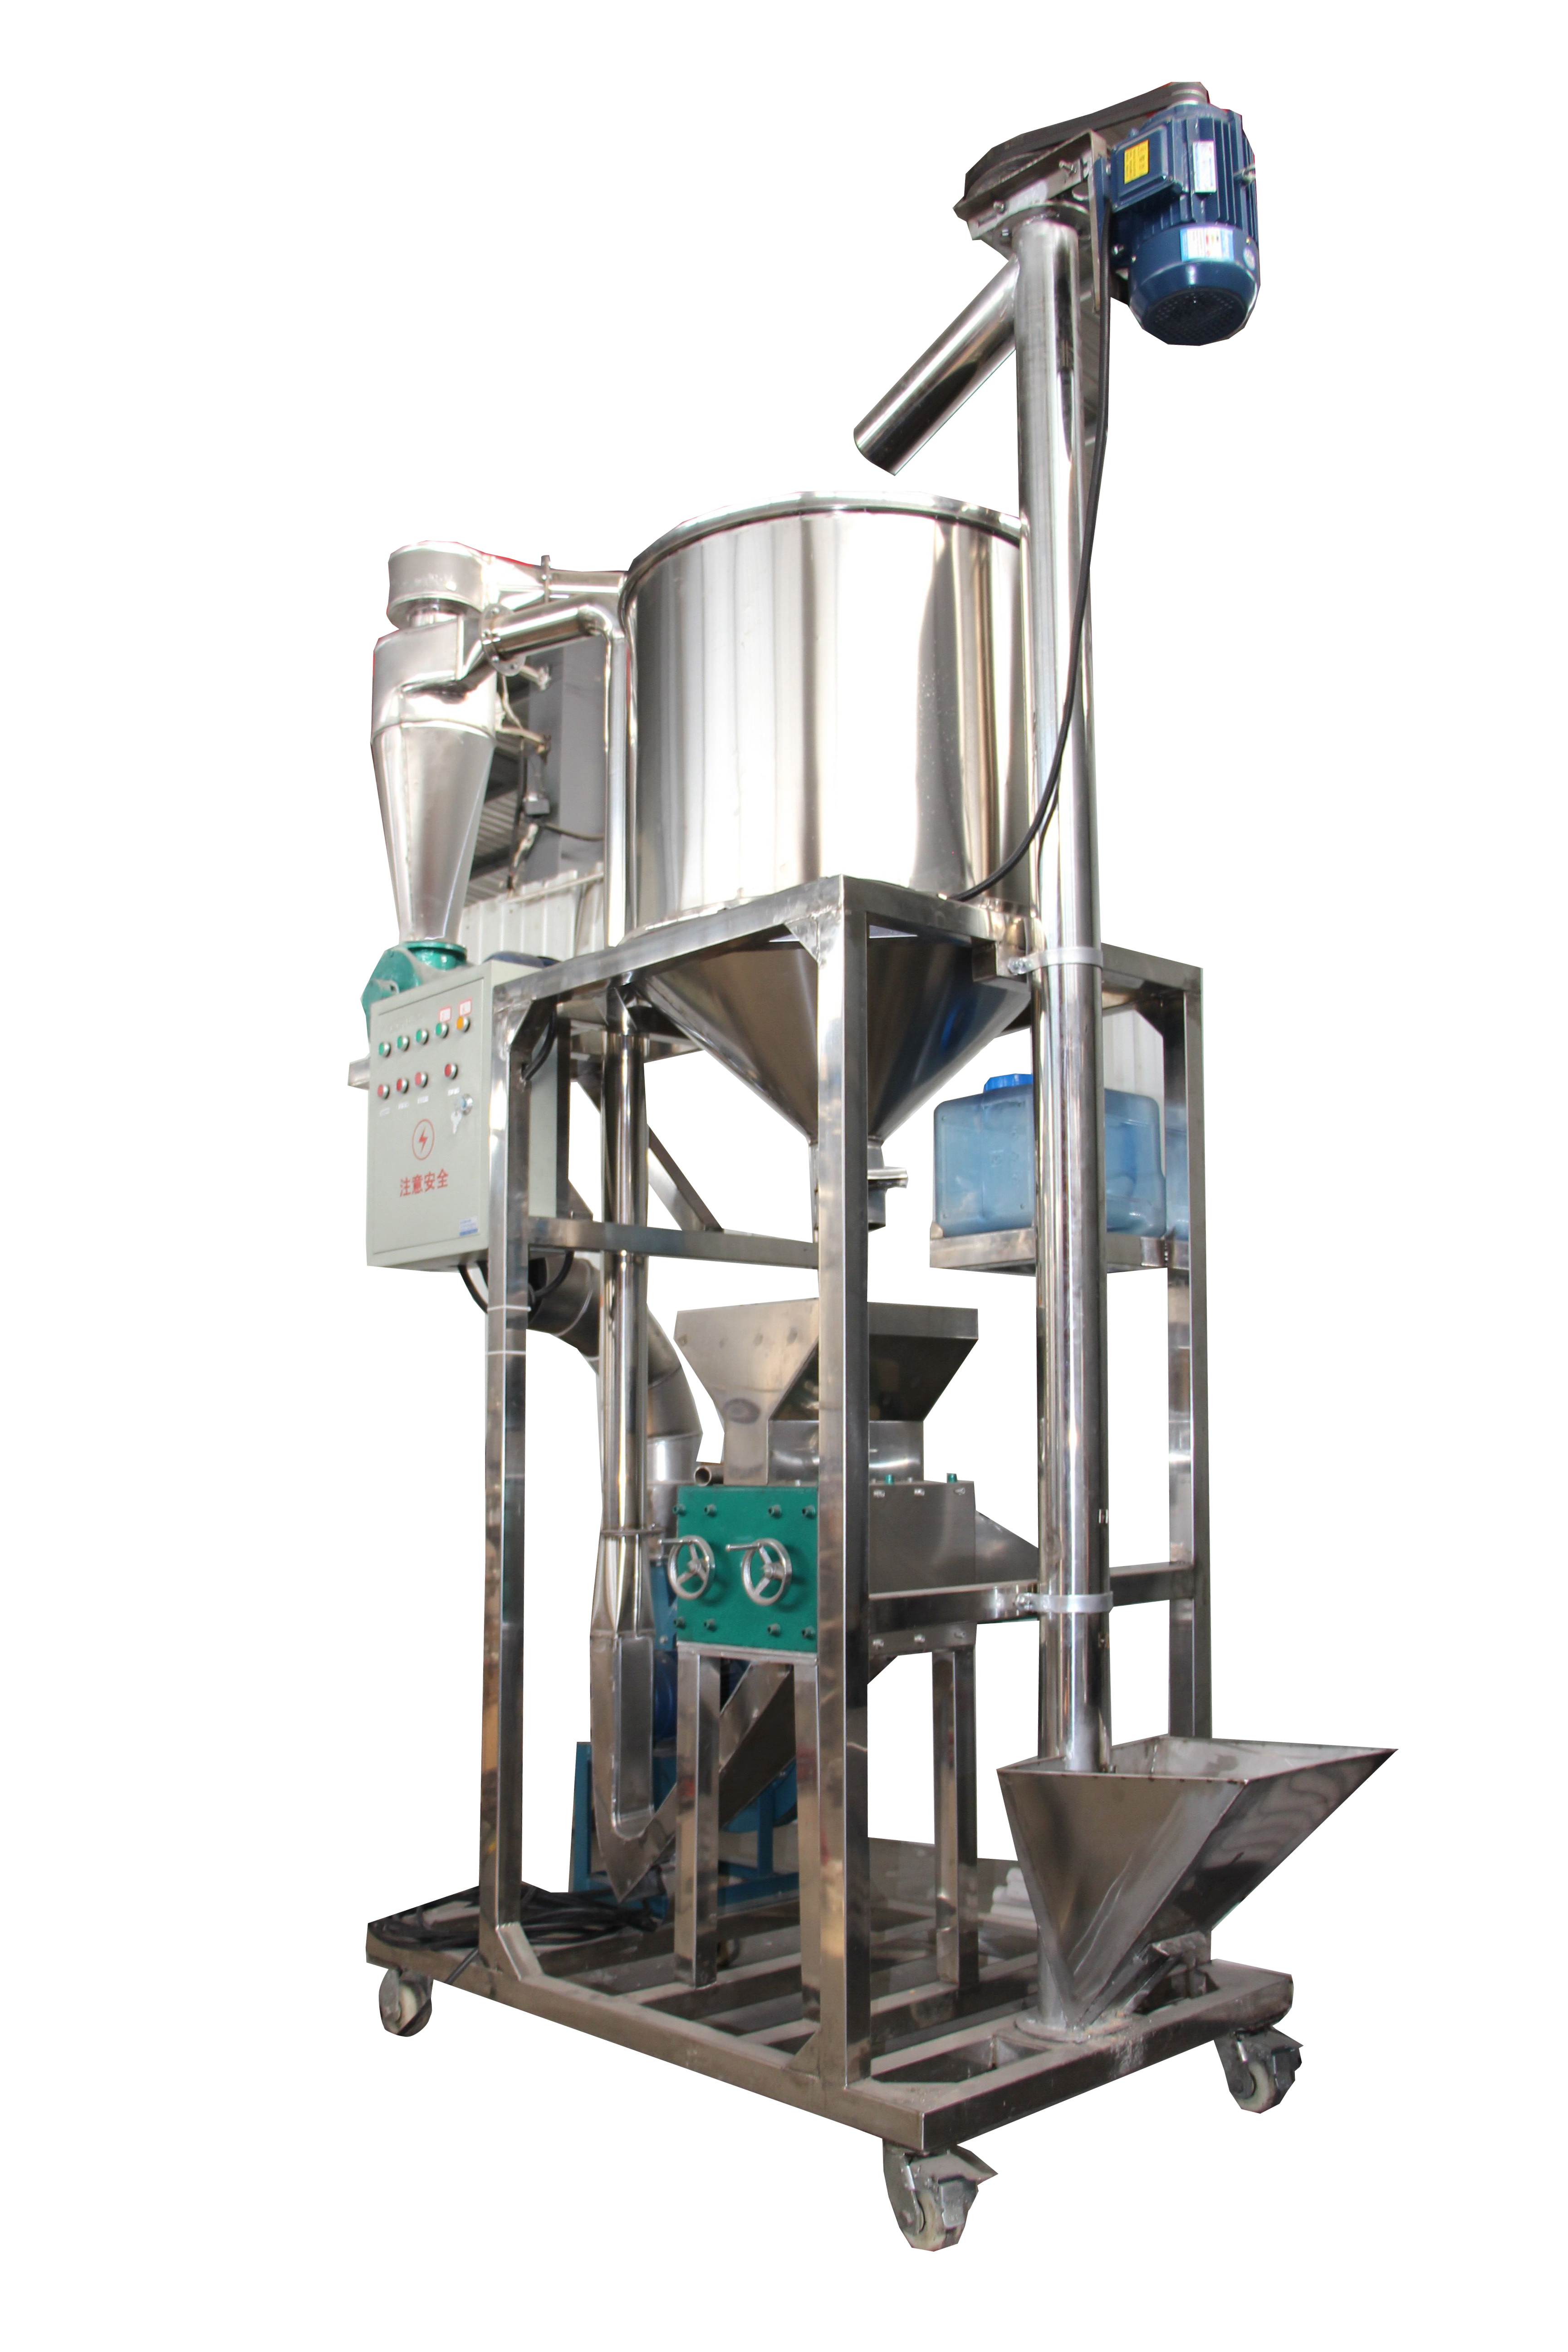 Automatic malt crushing and lifting system